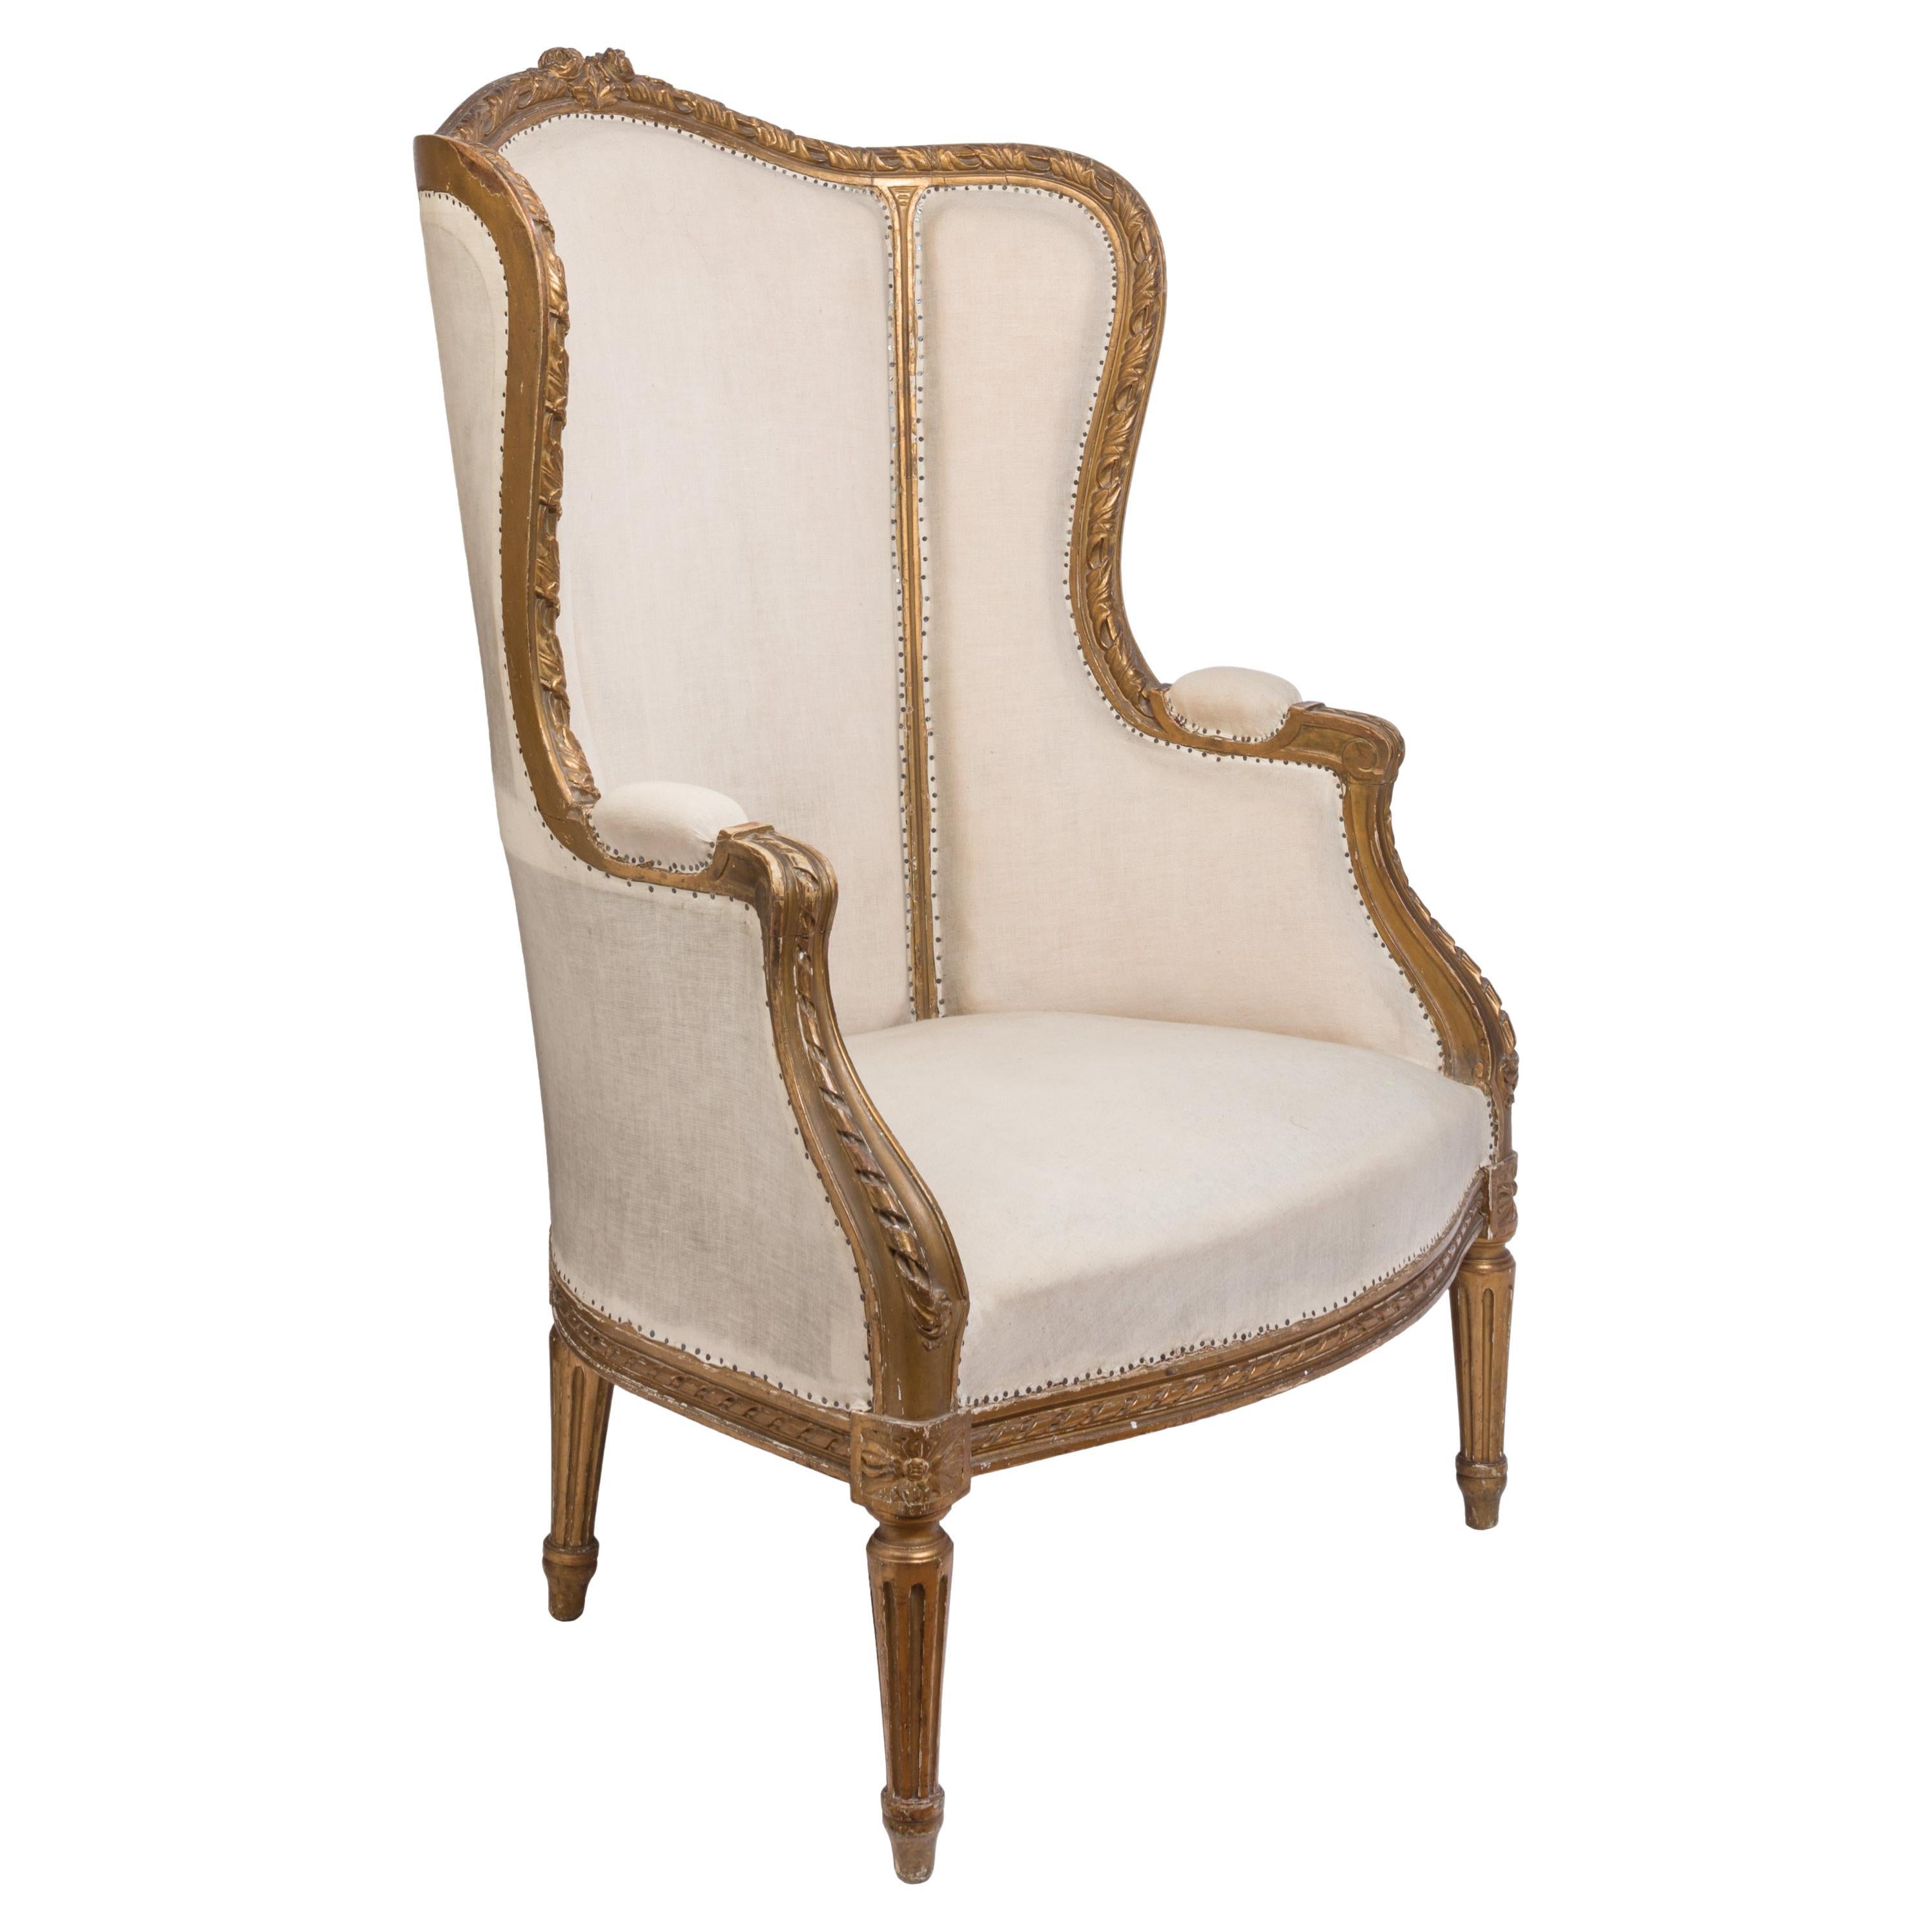 18th Century Louis XVI Bergère / Wingback Armchair with Carved Giltwood Details